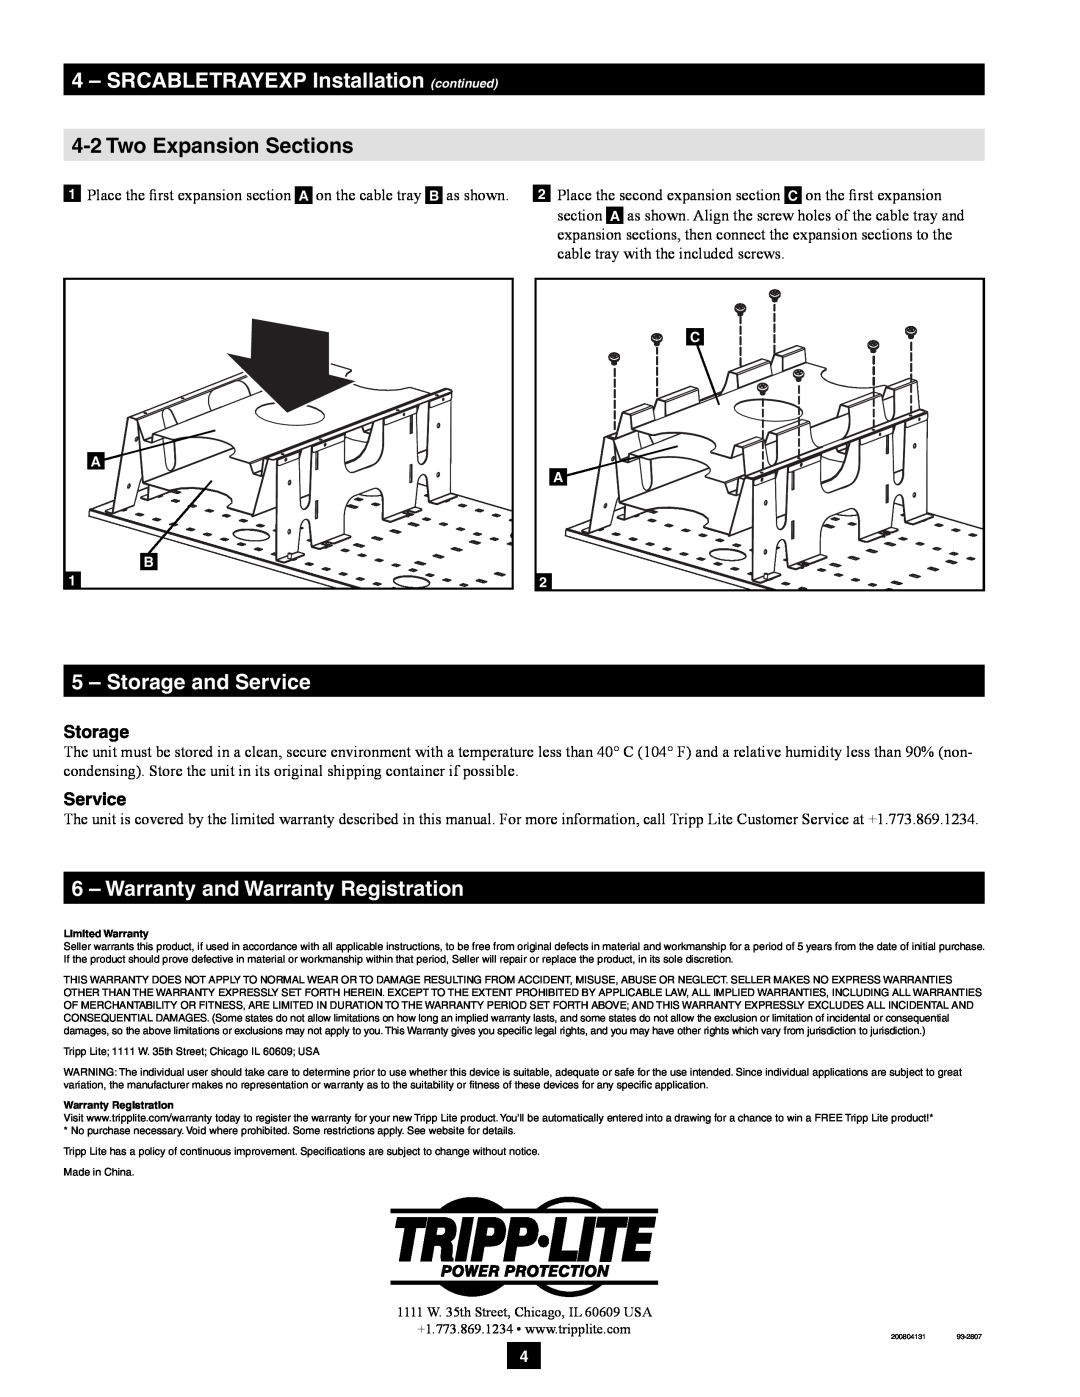 Tripp Lite owner manual 4-2Two Expansion Sections, SRCABLETRAYEXP Installation continued, Storage and Service 